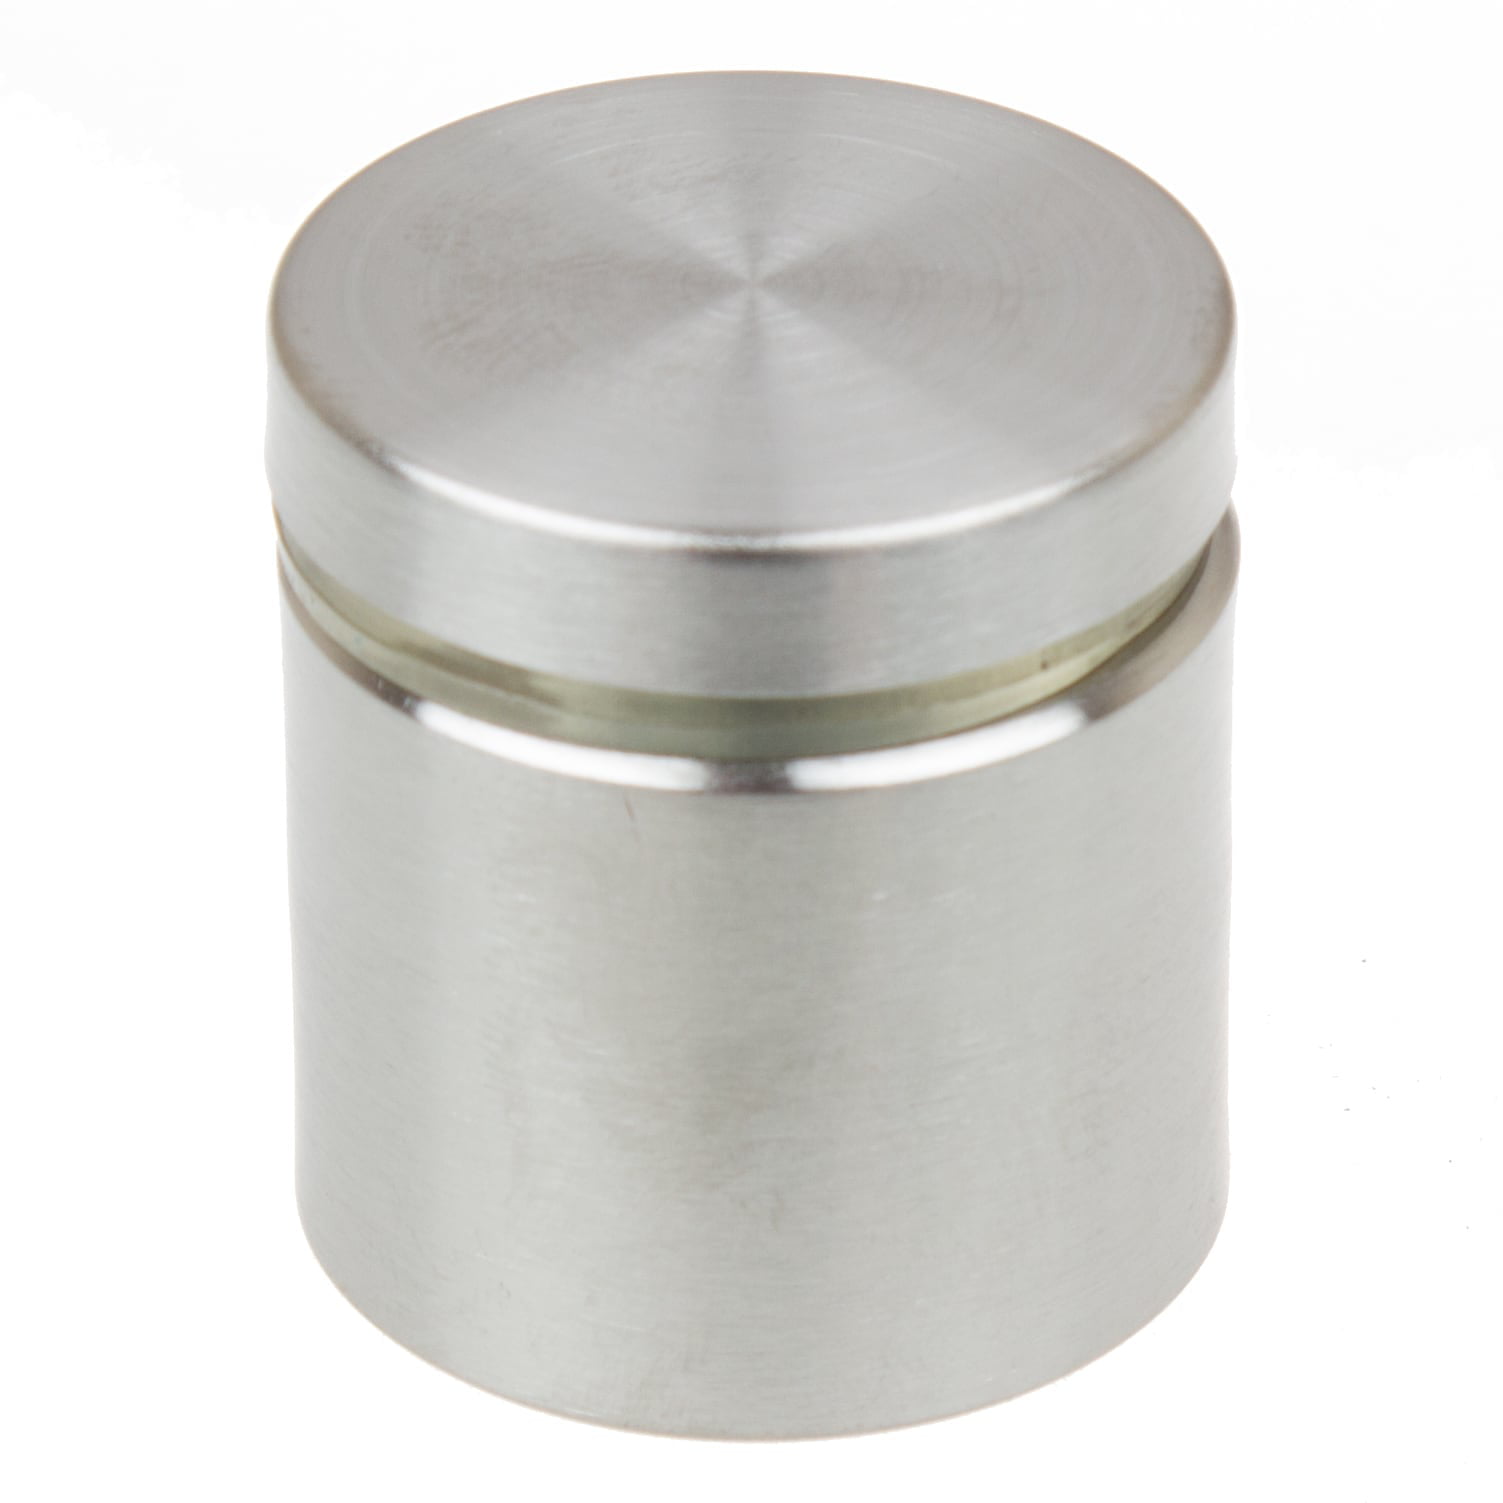 STAINLESS STEEL SPACERS STANDOFFS BUSH ALL DIAMETERS & LENGTHS & CLEARANCE HOLES 